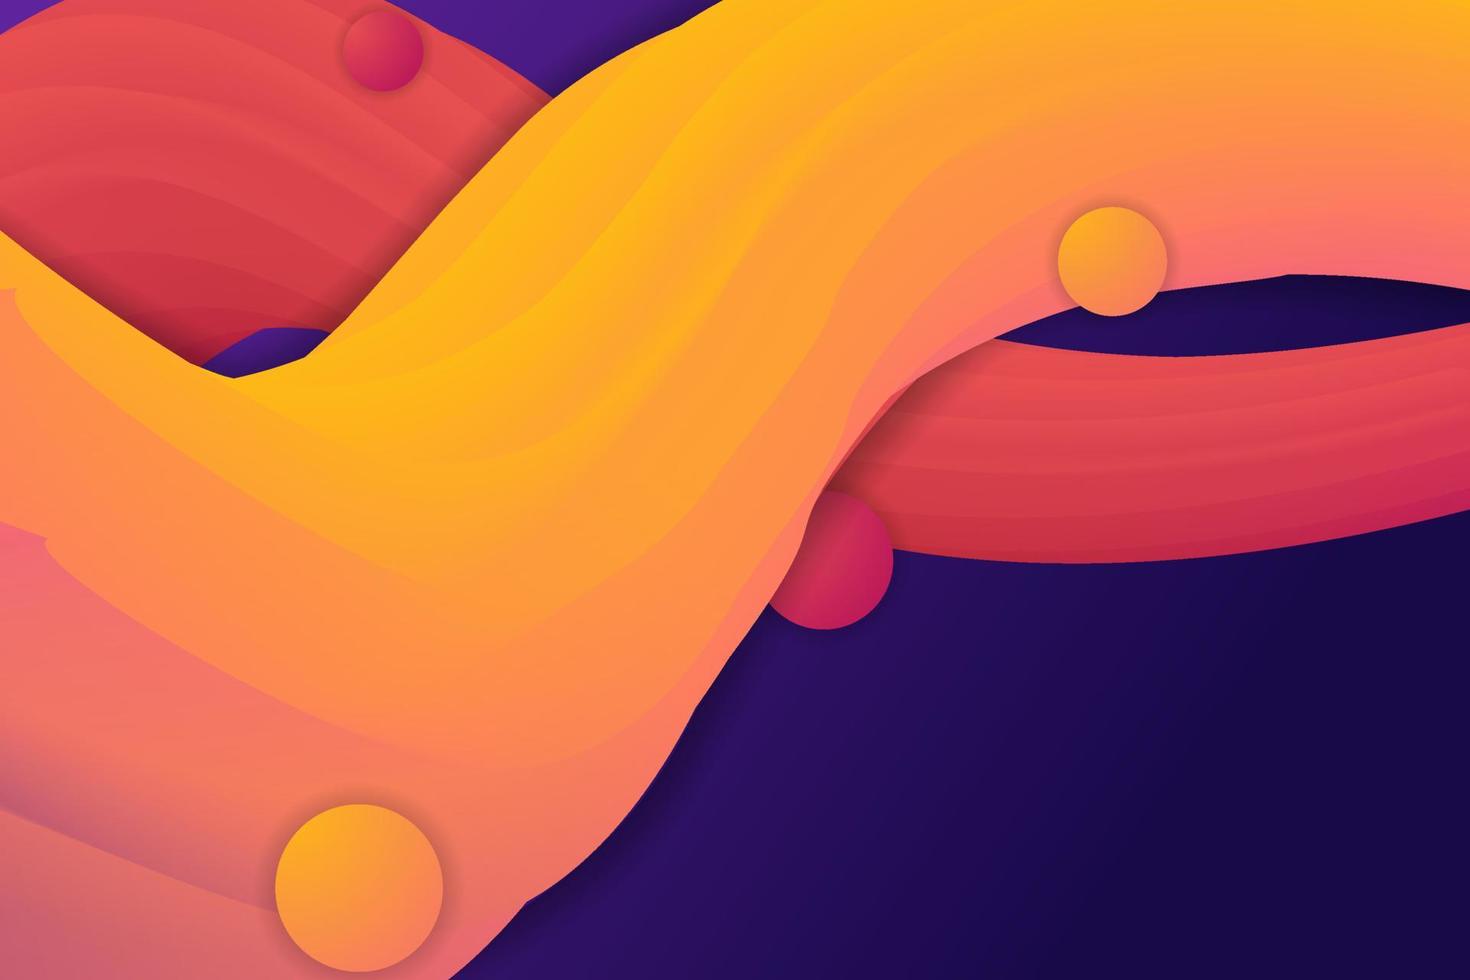 Abstract Fluid Shape Background Gradient Dynamic Overlapped Orange and Yellow vector